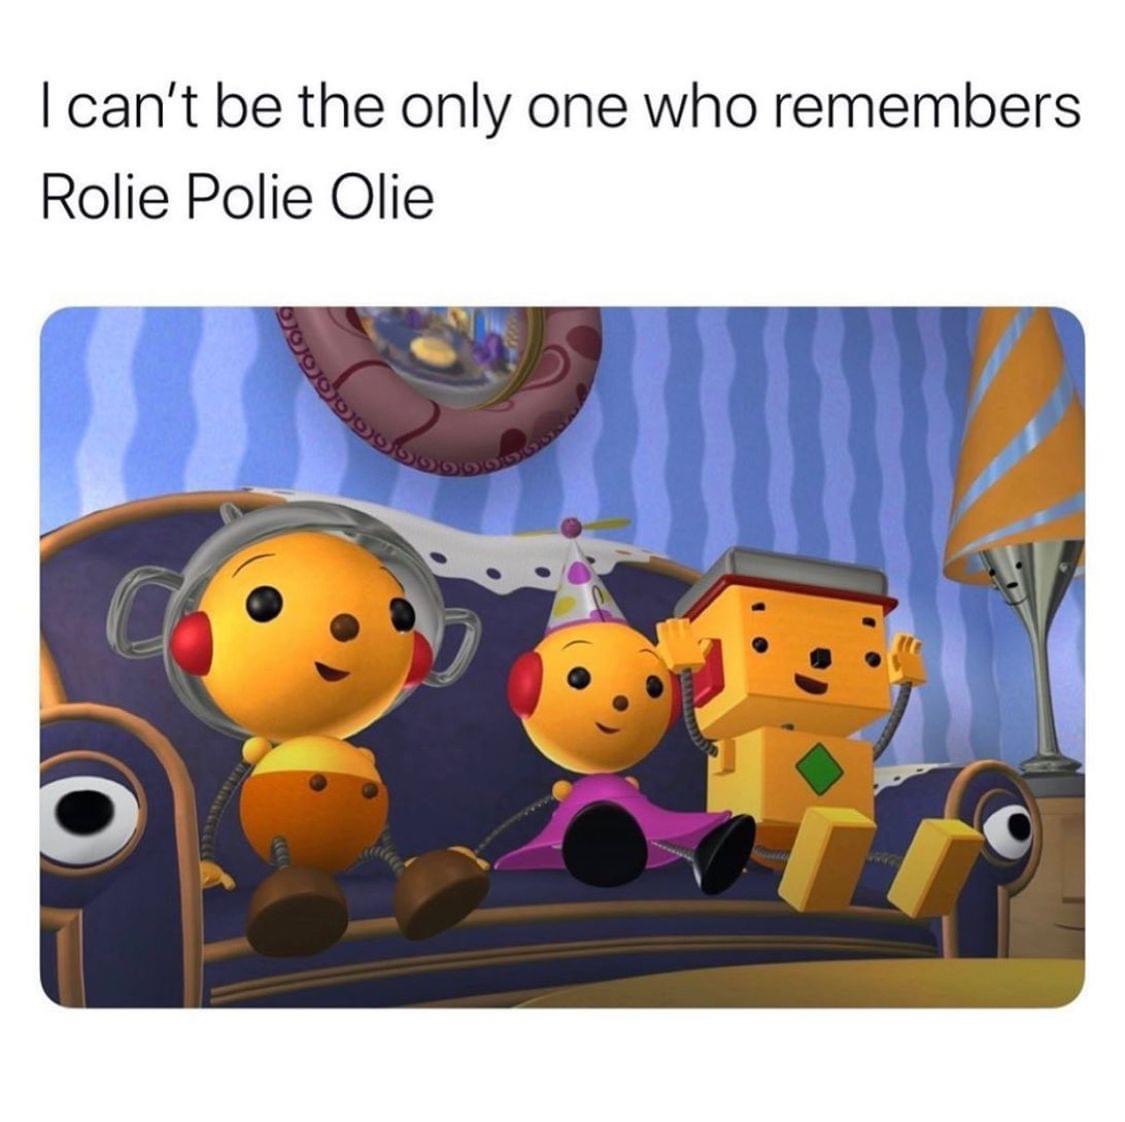 rolie polie olie - I can't be the only one who remembers Rolie Polie Olie svojojdoo